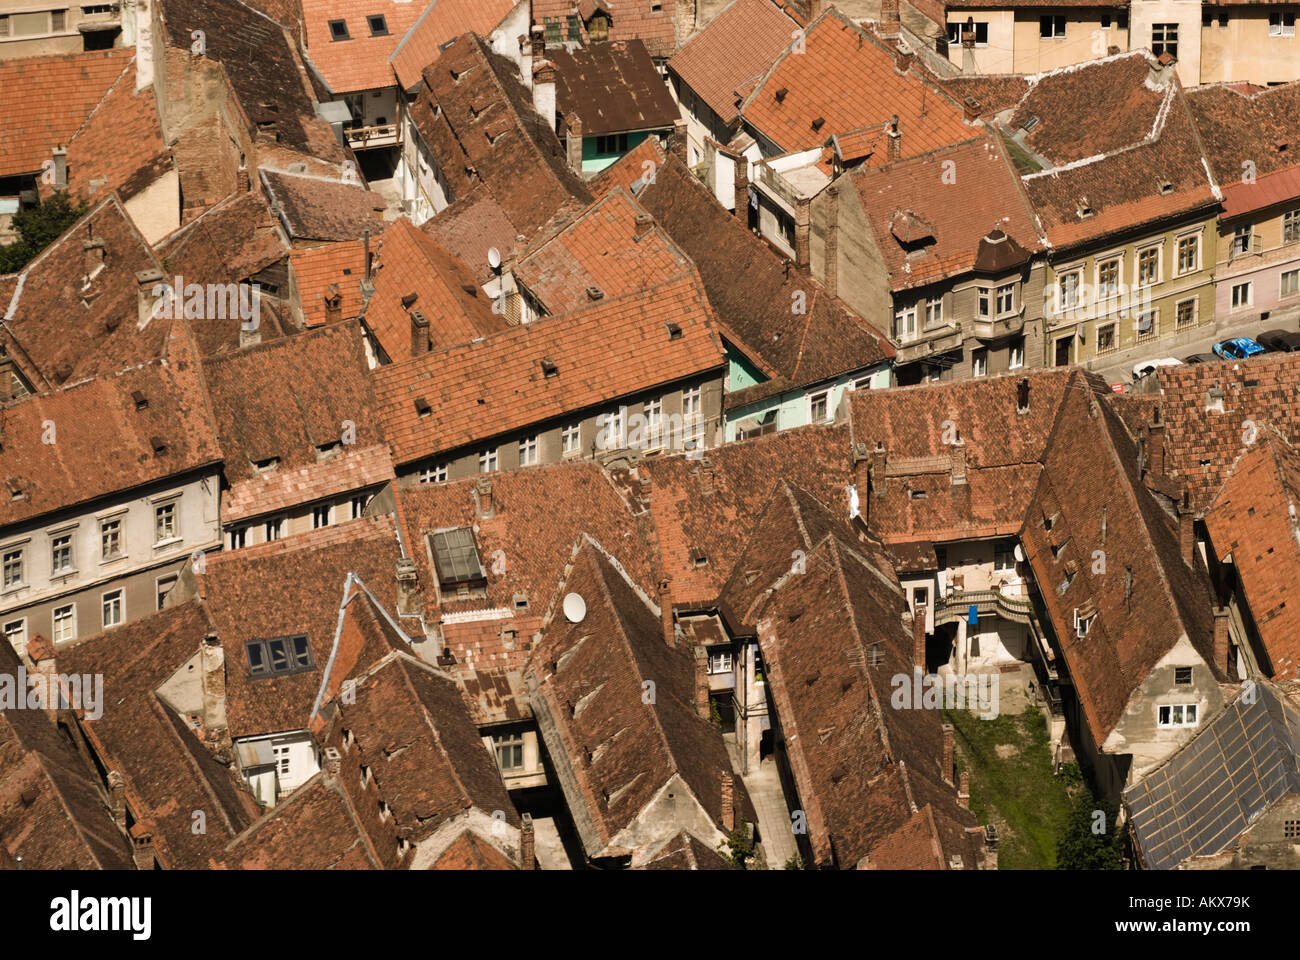 Looking down onto terracotta rooftops in Brasov, Romania Stock Photo